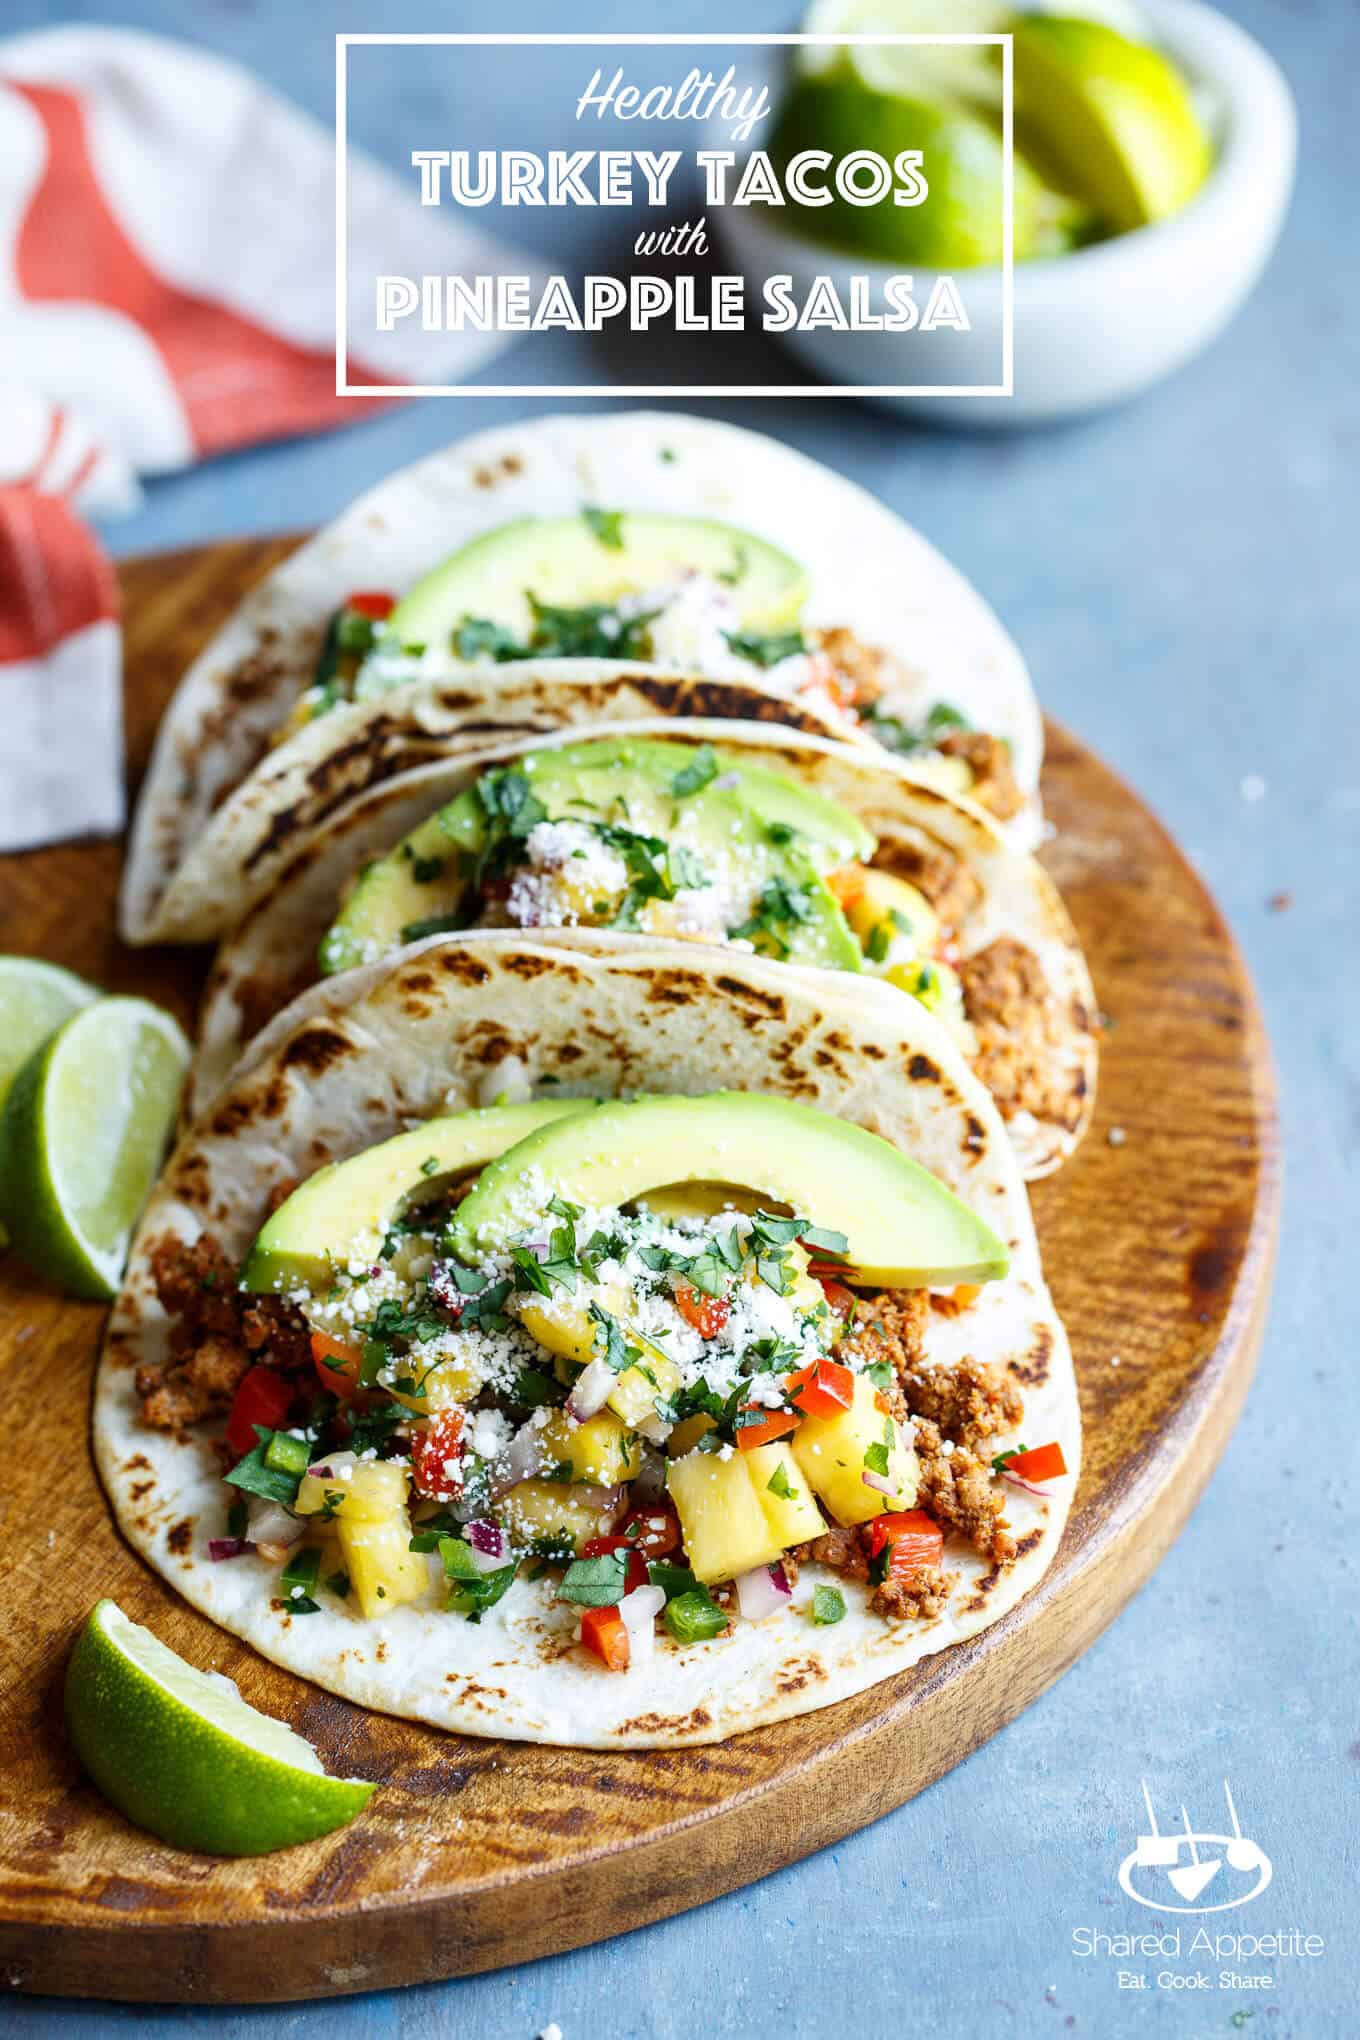 Healthy Turkey Tacos With Pineapple Salsa Shared Appetite